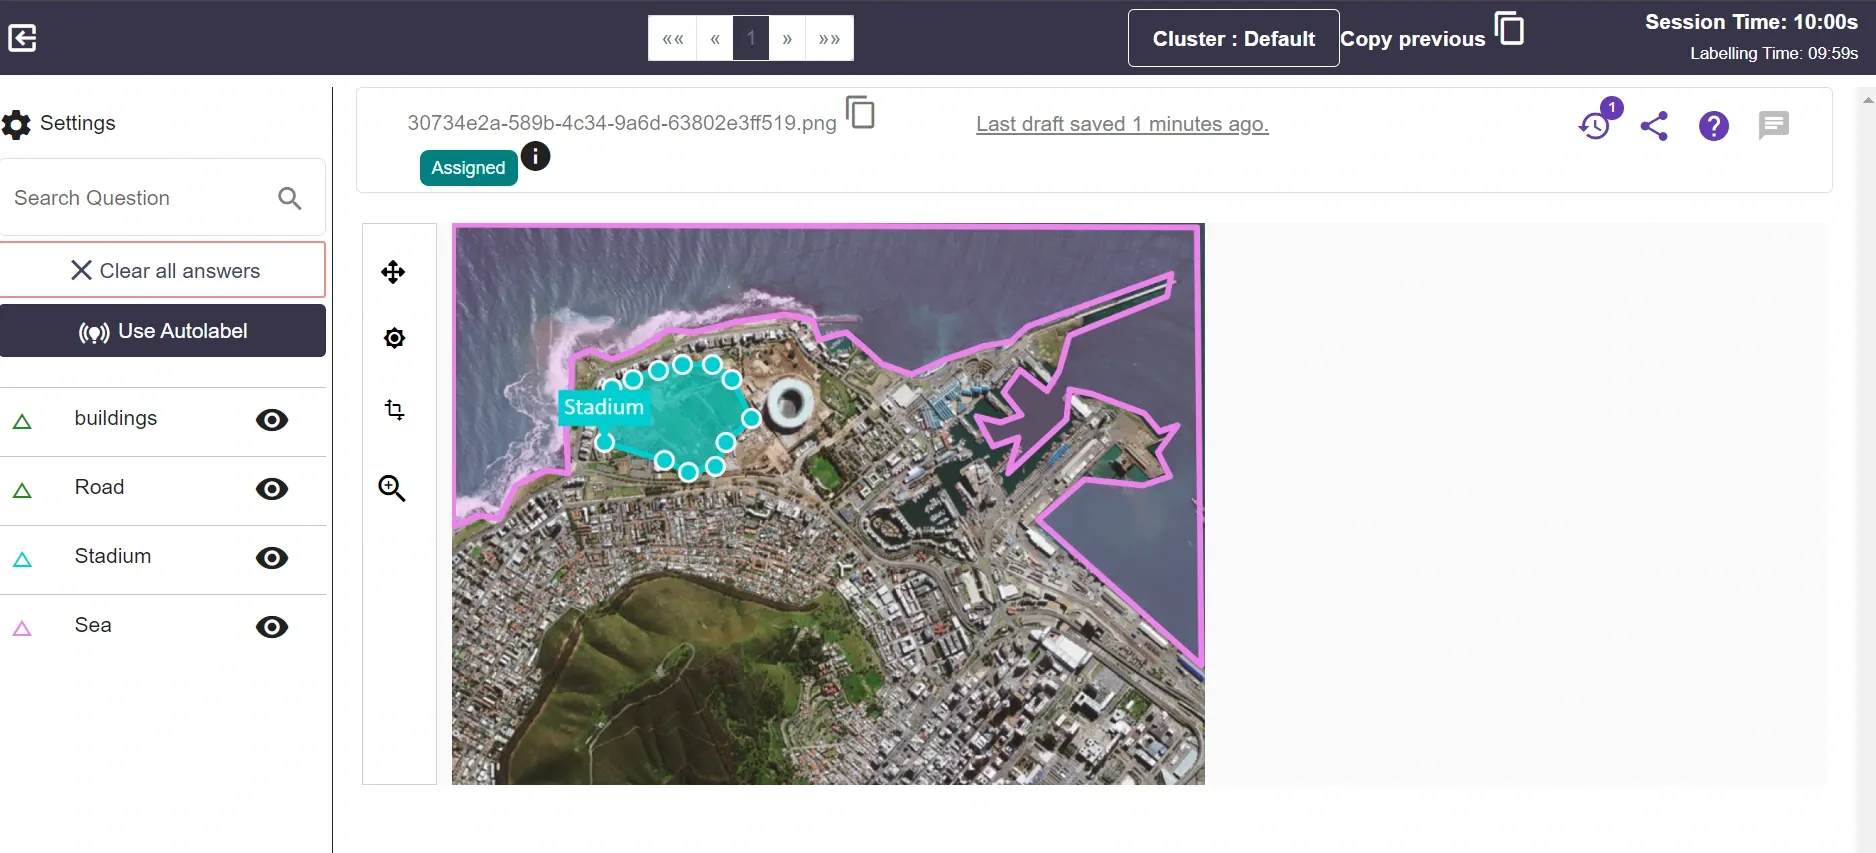 6 Best Geospatial Image Annotation & Labeling Tools